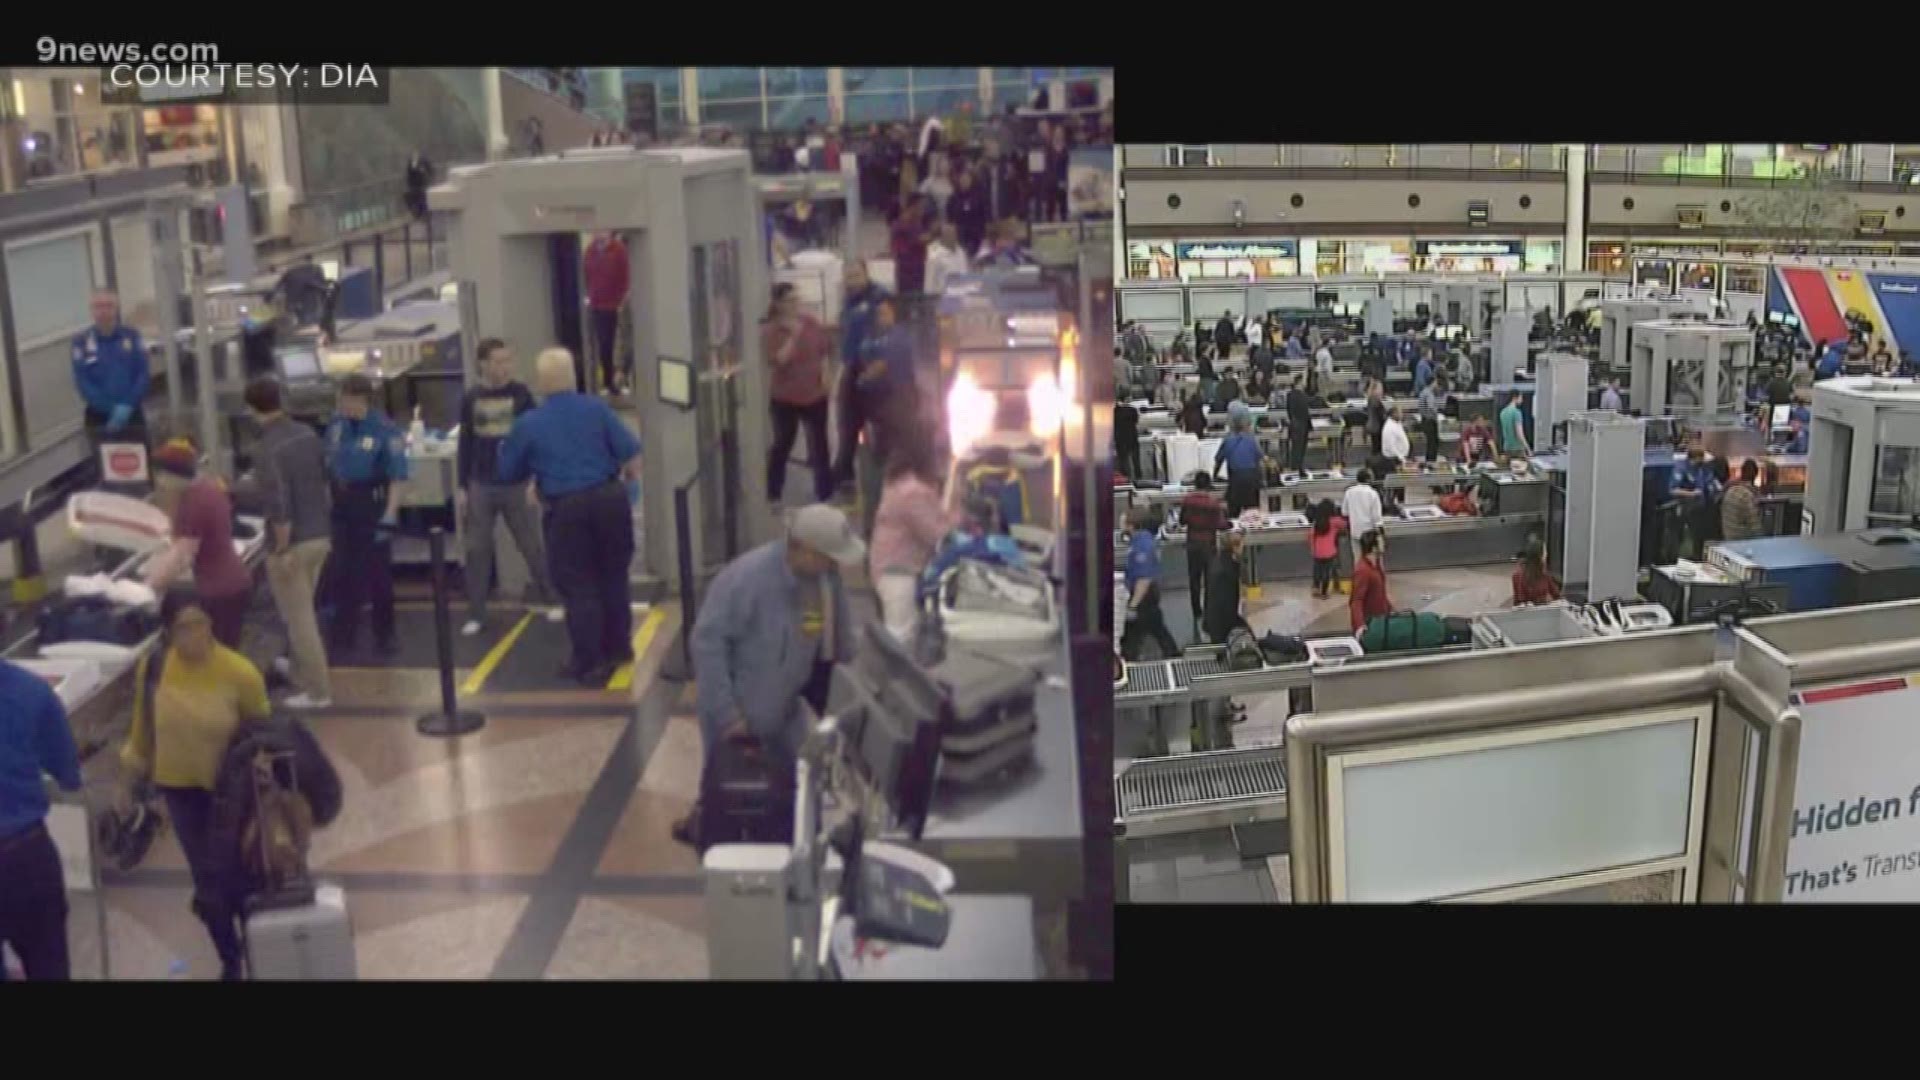 It wasn't more than a minute and a half before a TSA agent grabbed a fire extinguisher and put out the small fire.